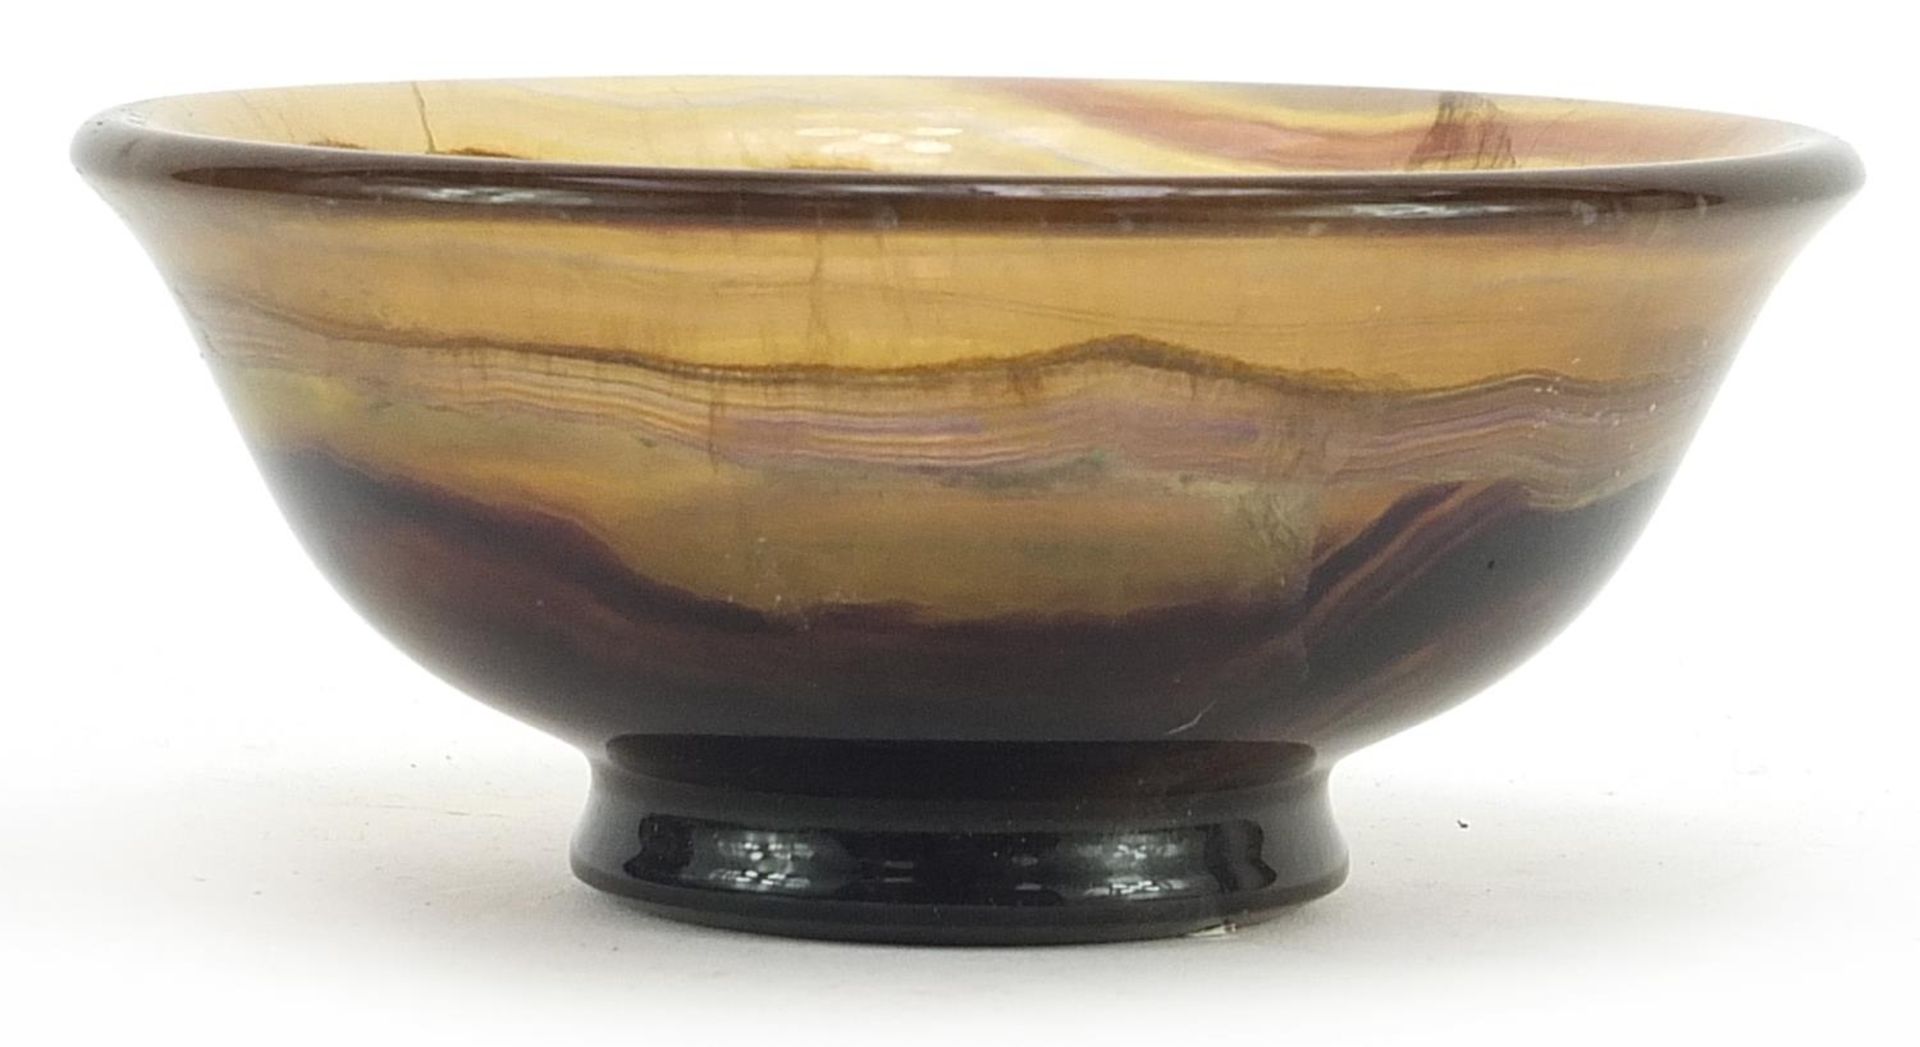 Polished flourite footed bowl, 14.5cm in diameter - Image 2 of 3